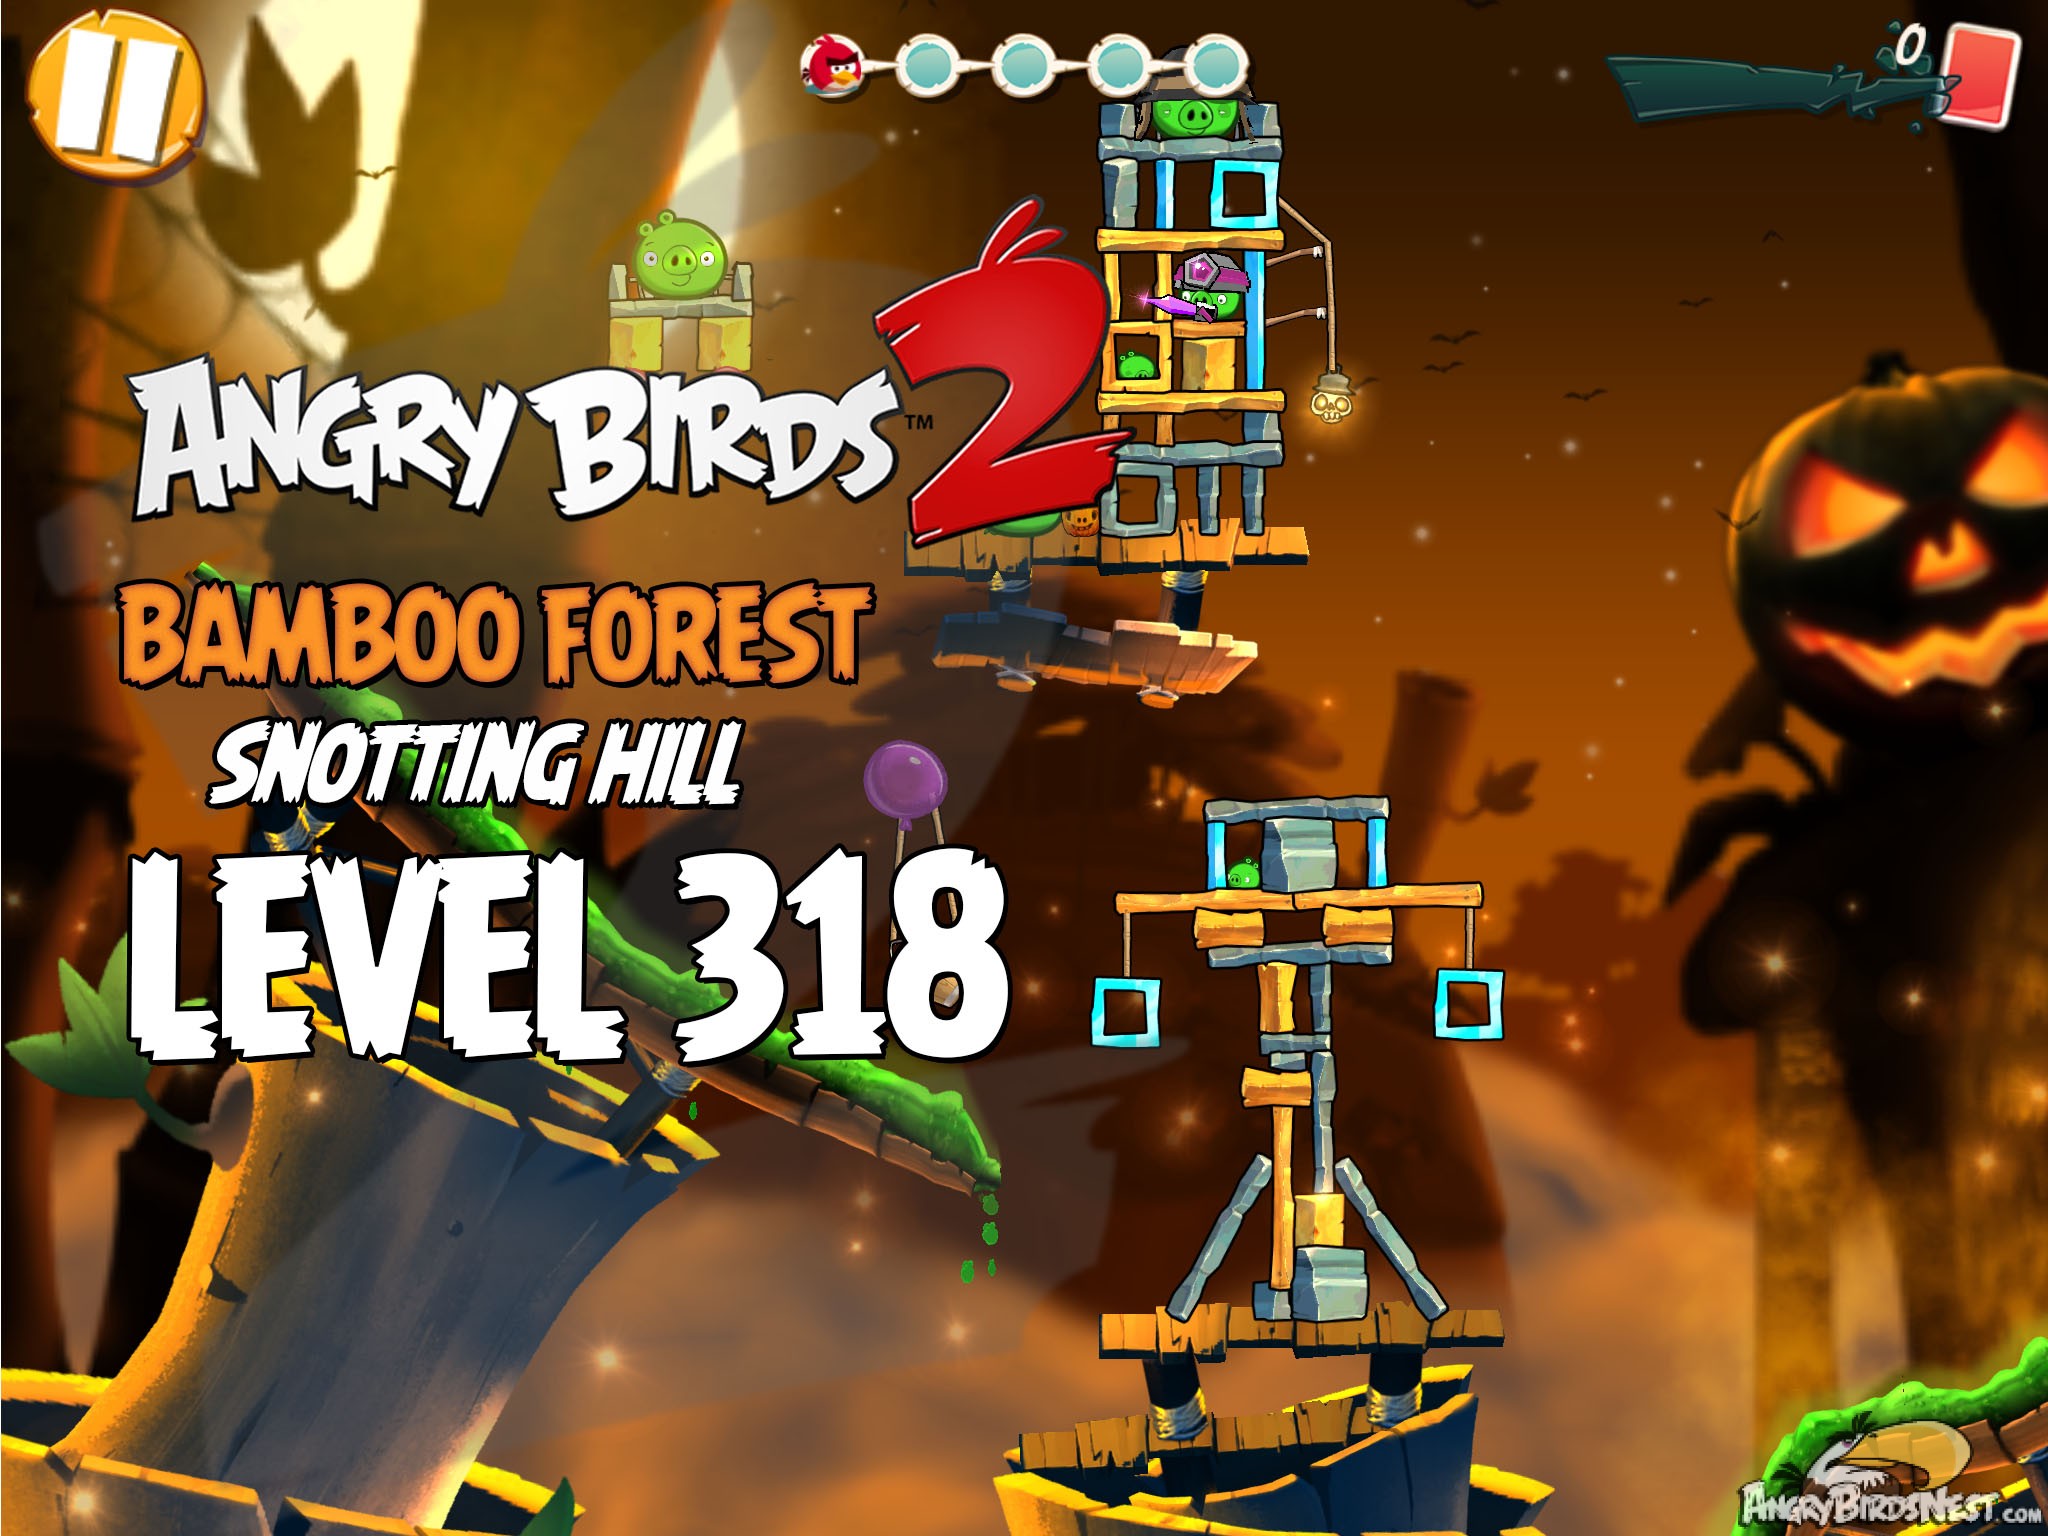 Angry Birds 2 Bamboo Forest Snotting Hill Level 318